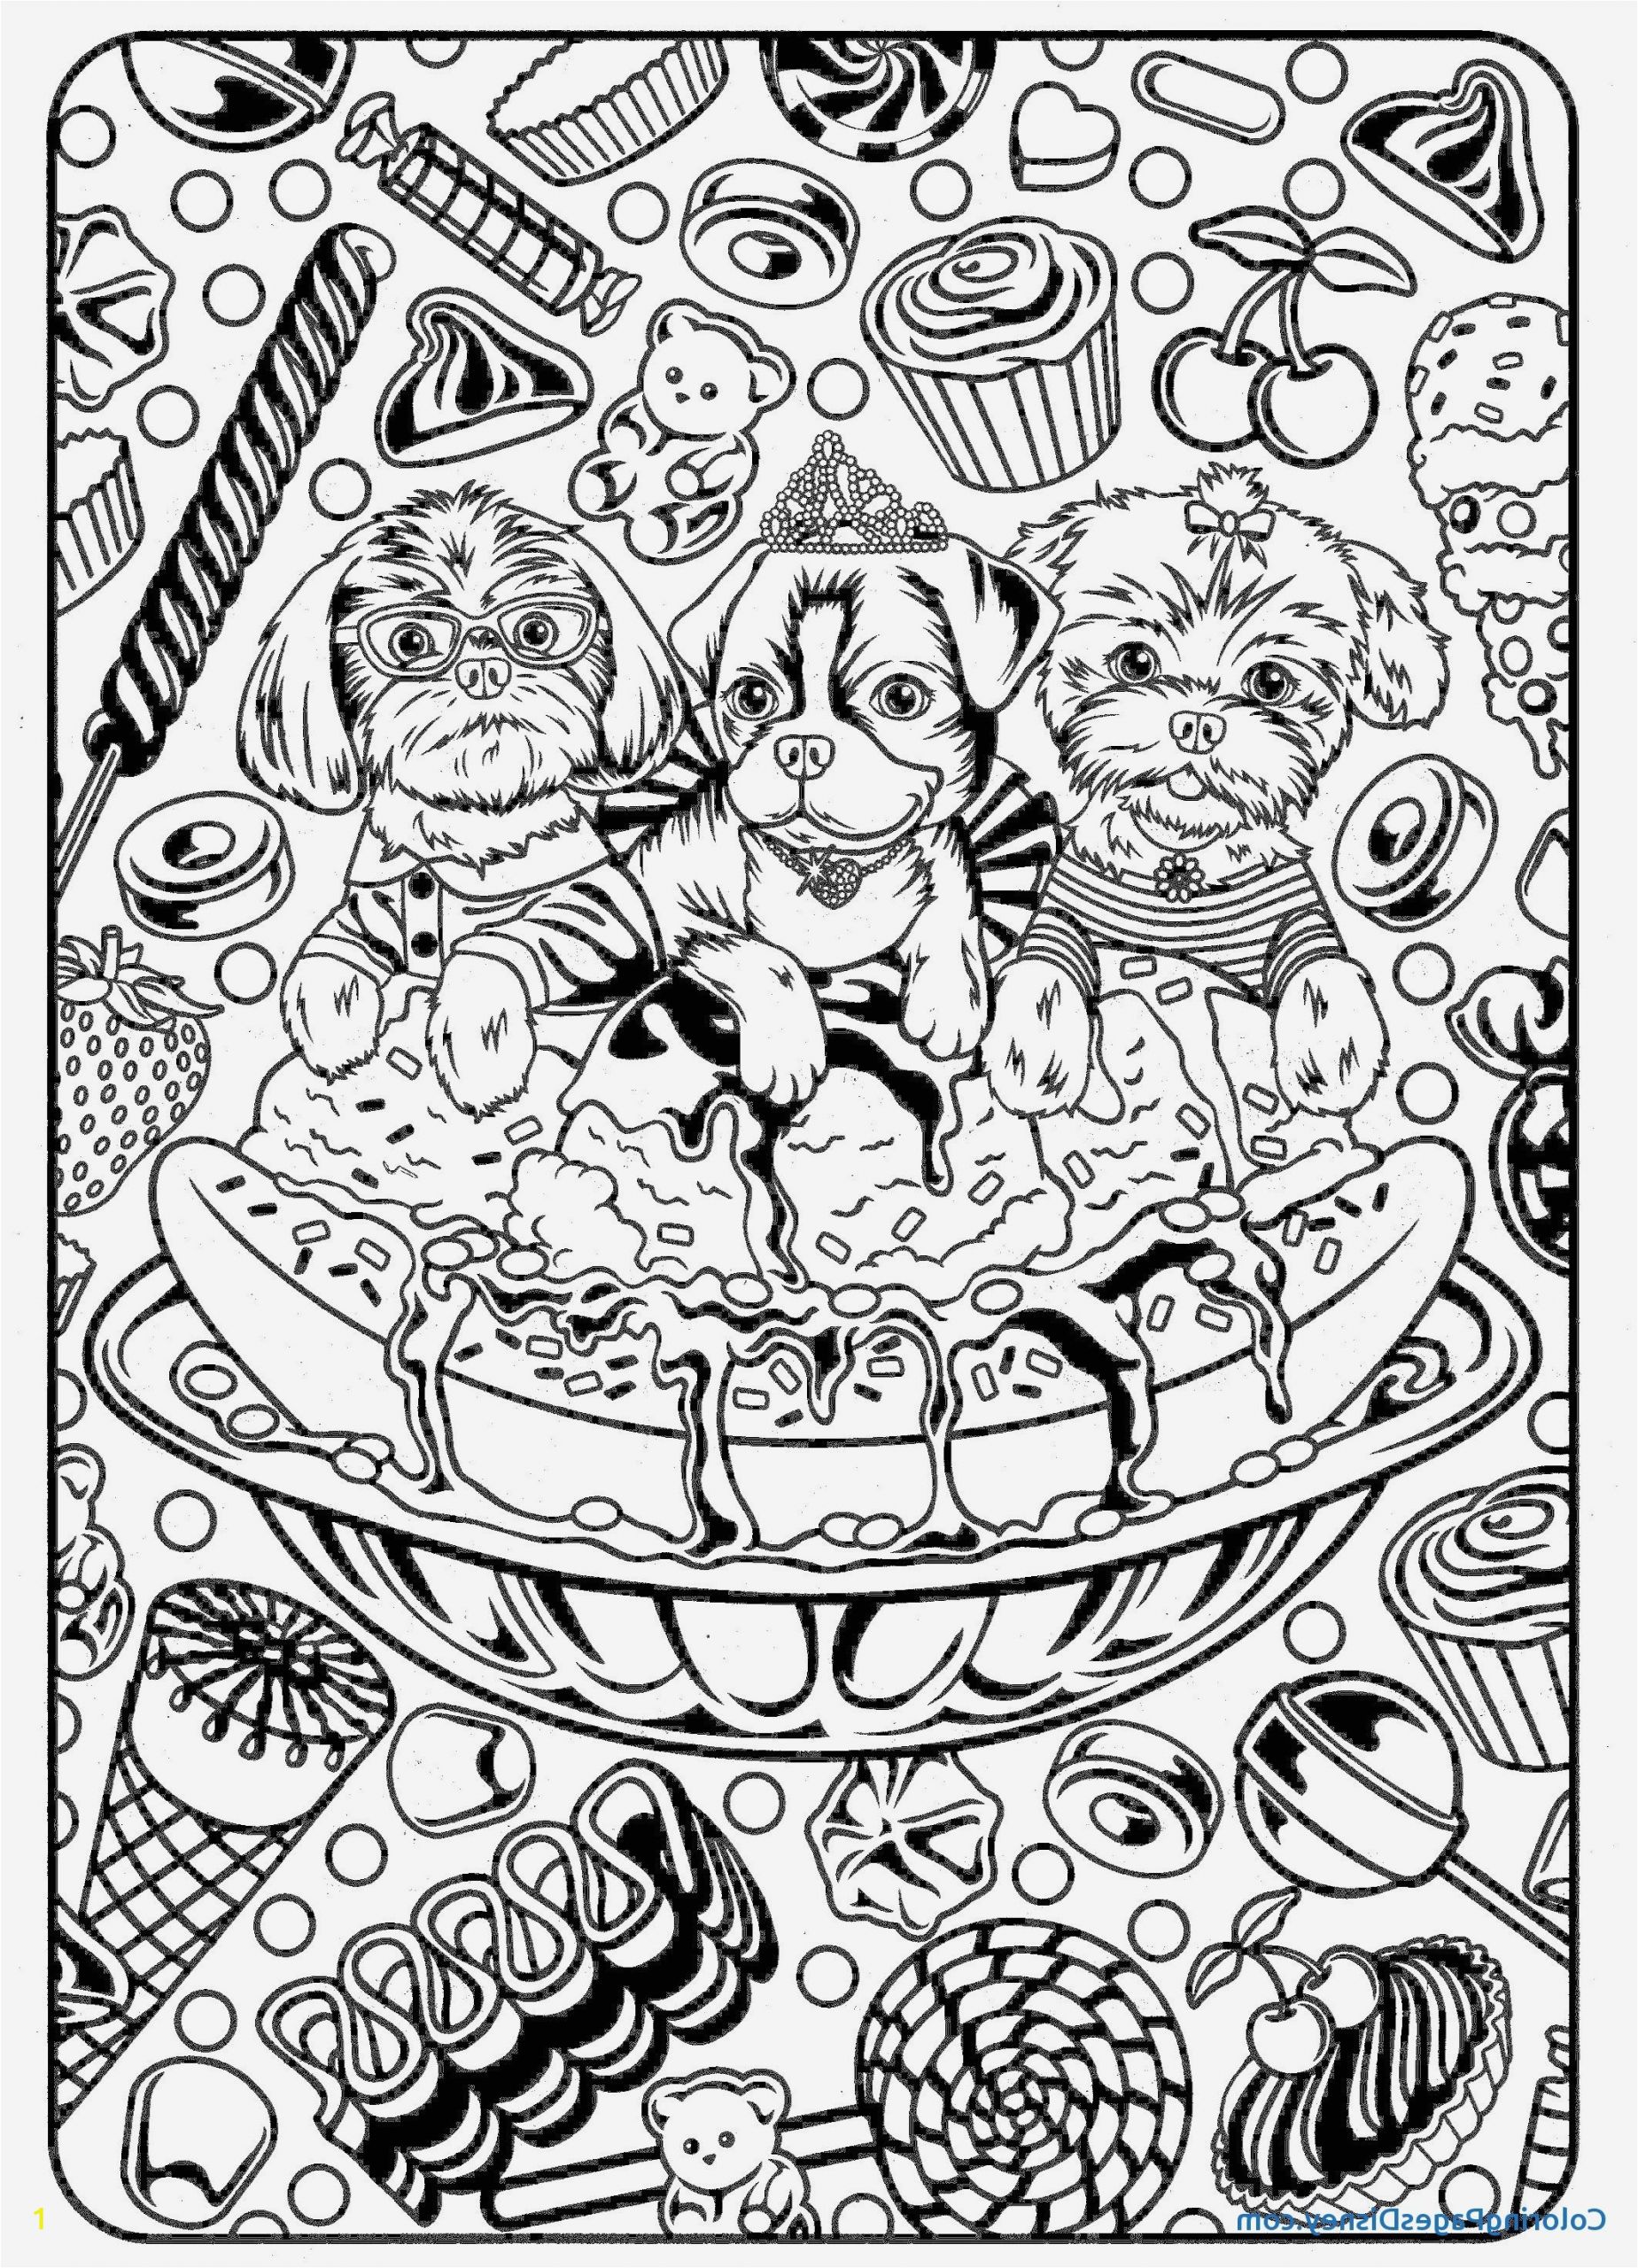 Descendants 3 Coloring Pages 26 Awesome S Rangoli Coloring Page